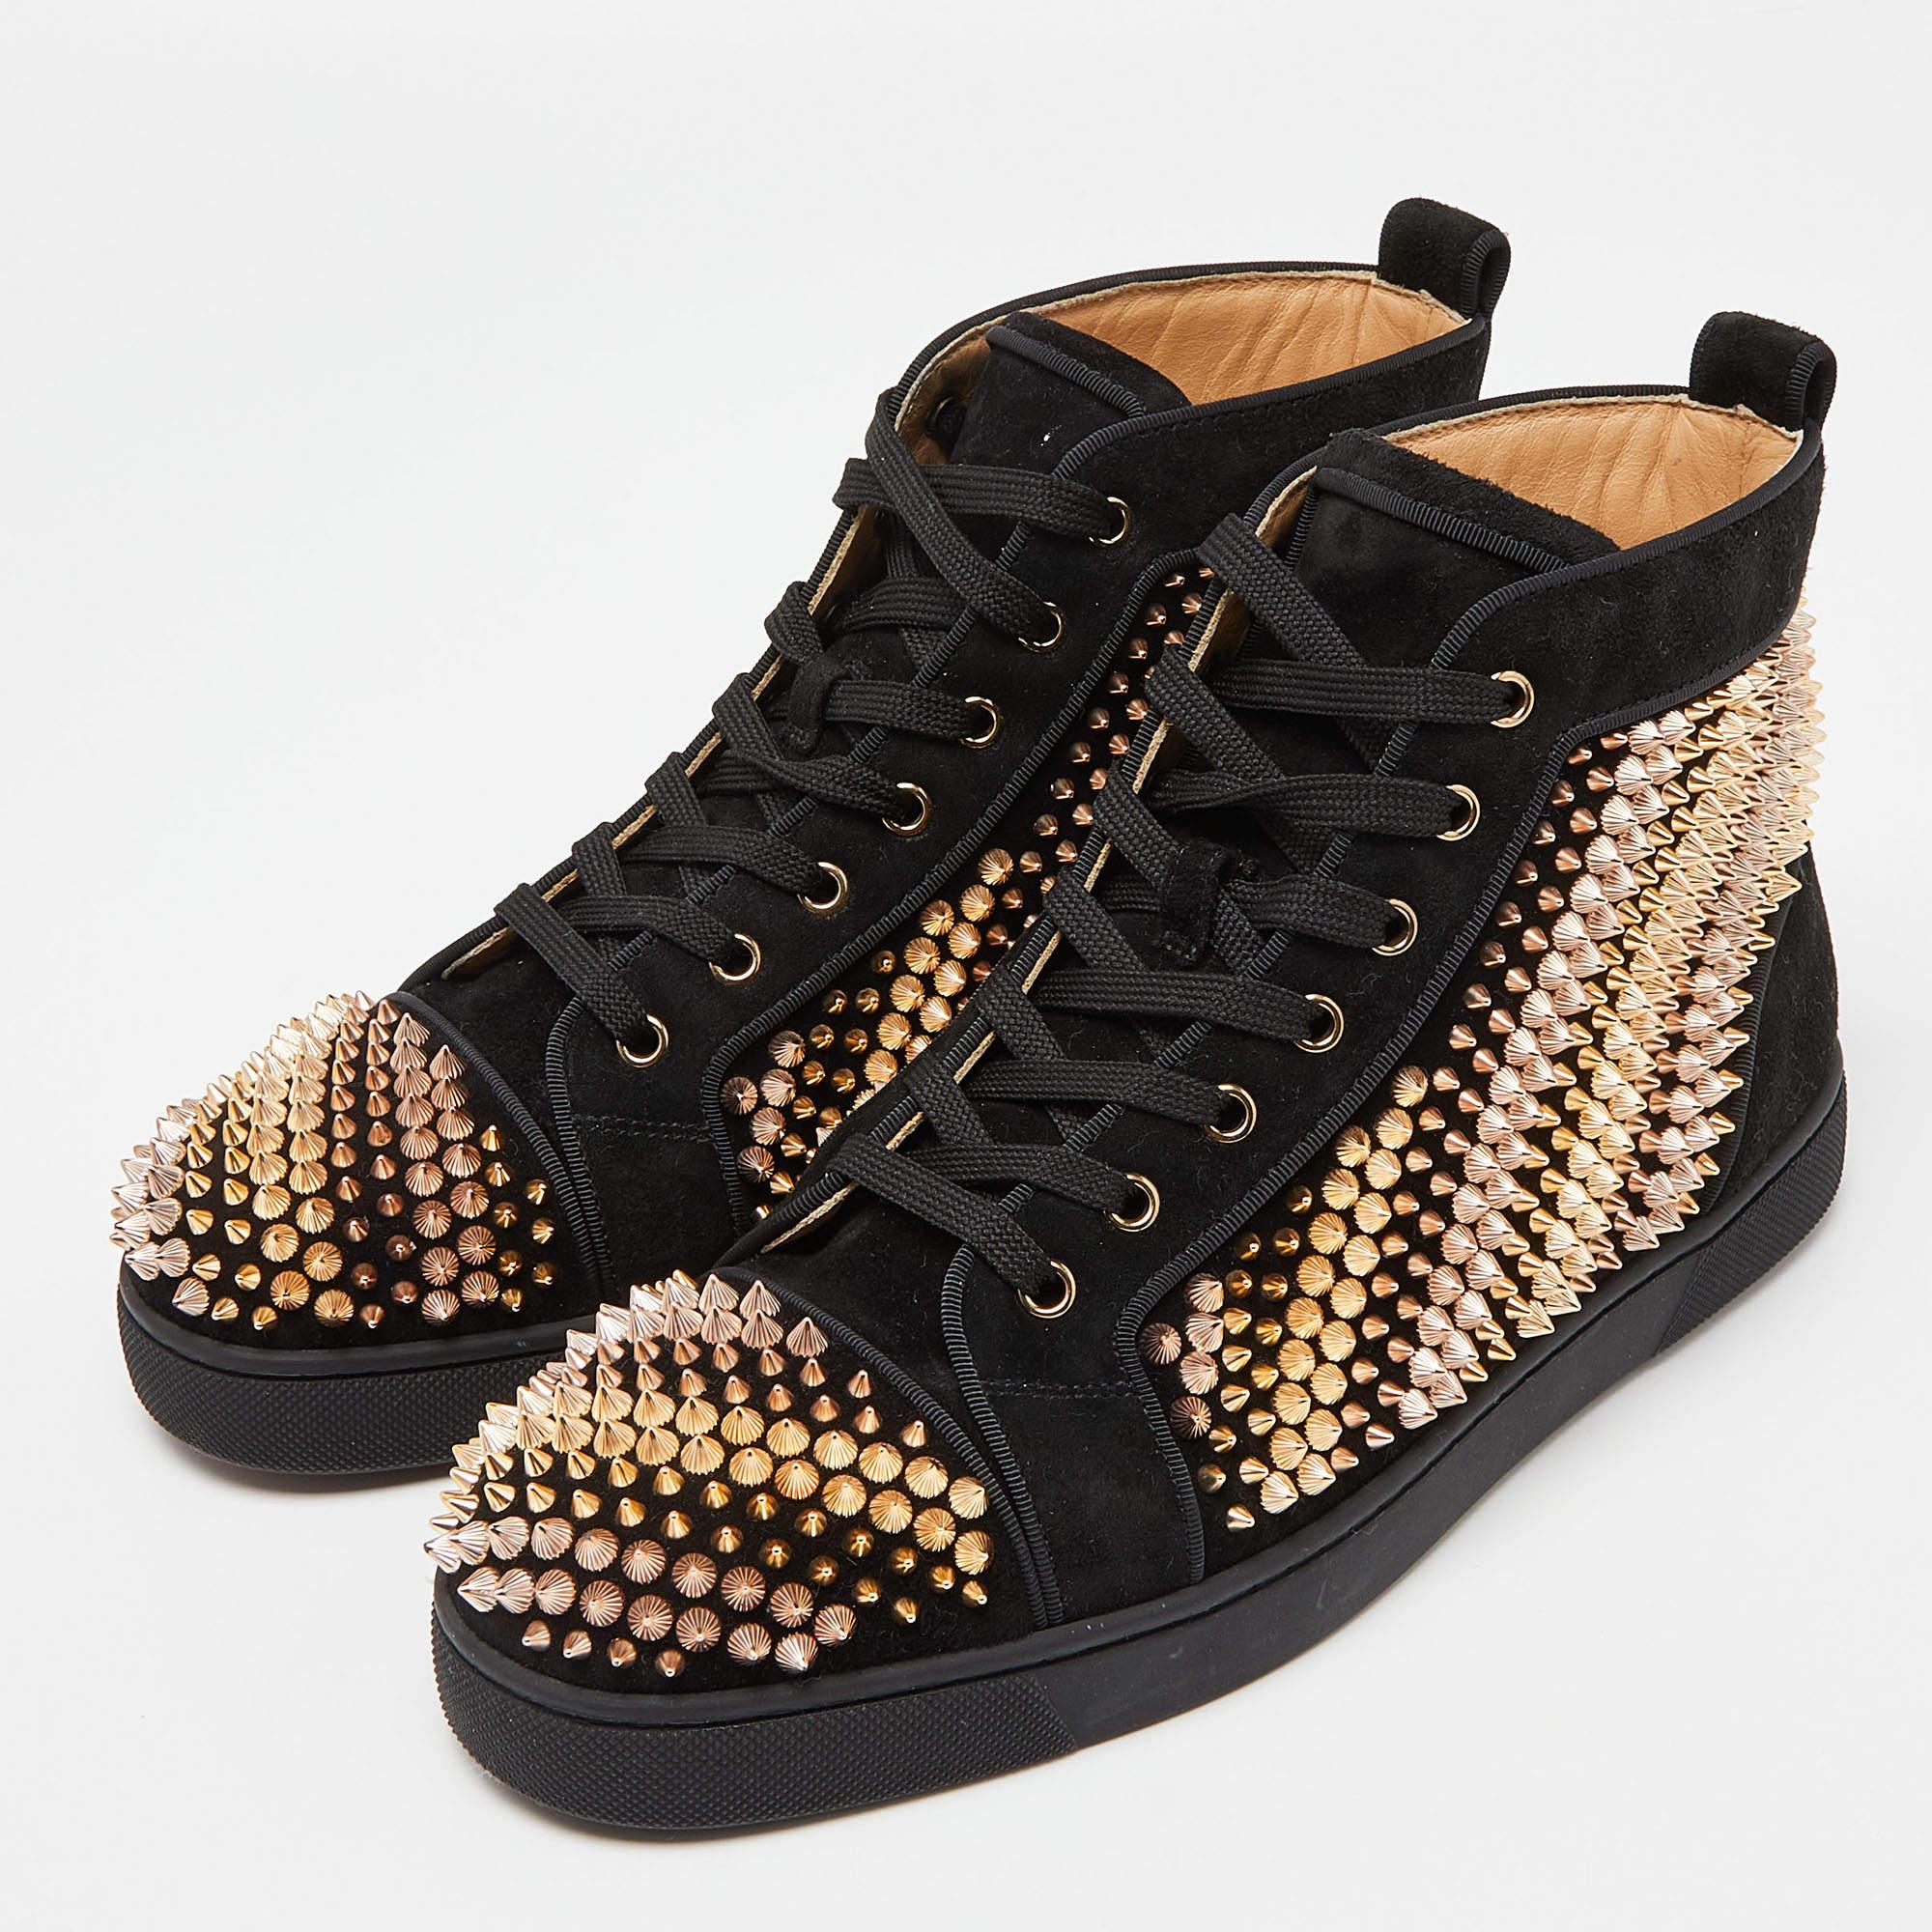 Add a statement appeal to your outfit with these sneakers. Made from premium materials, they feature lace-up vamps and spike details all over. The rubber sole of this pair aims to provide you with enduring ease.

